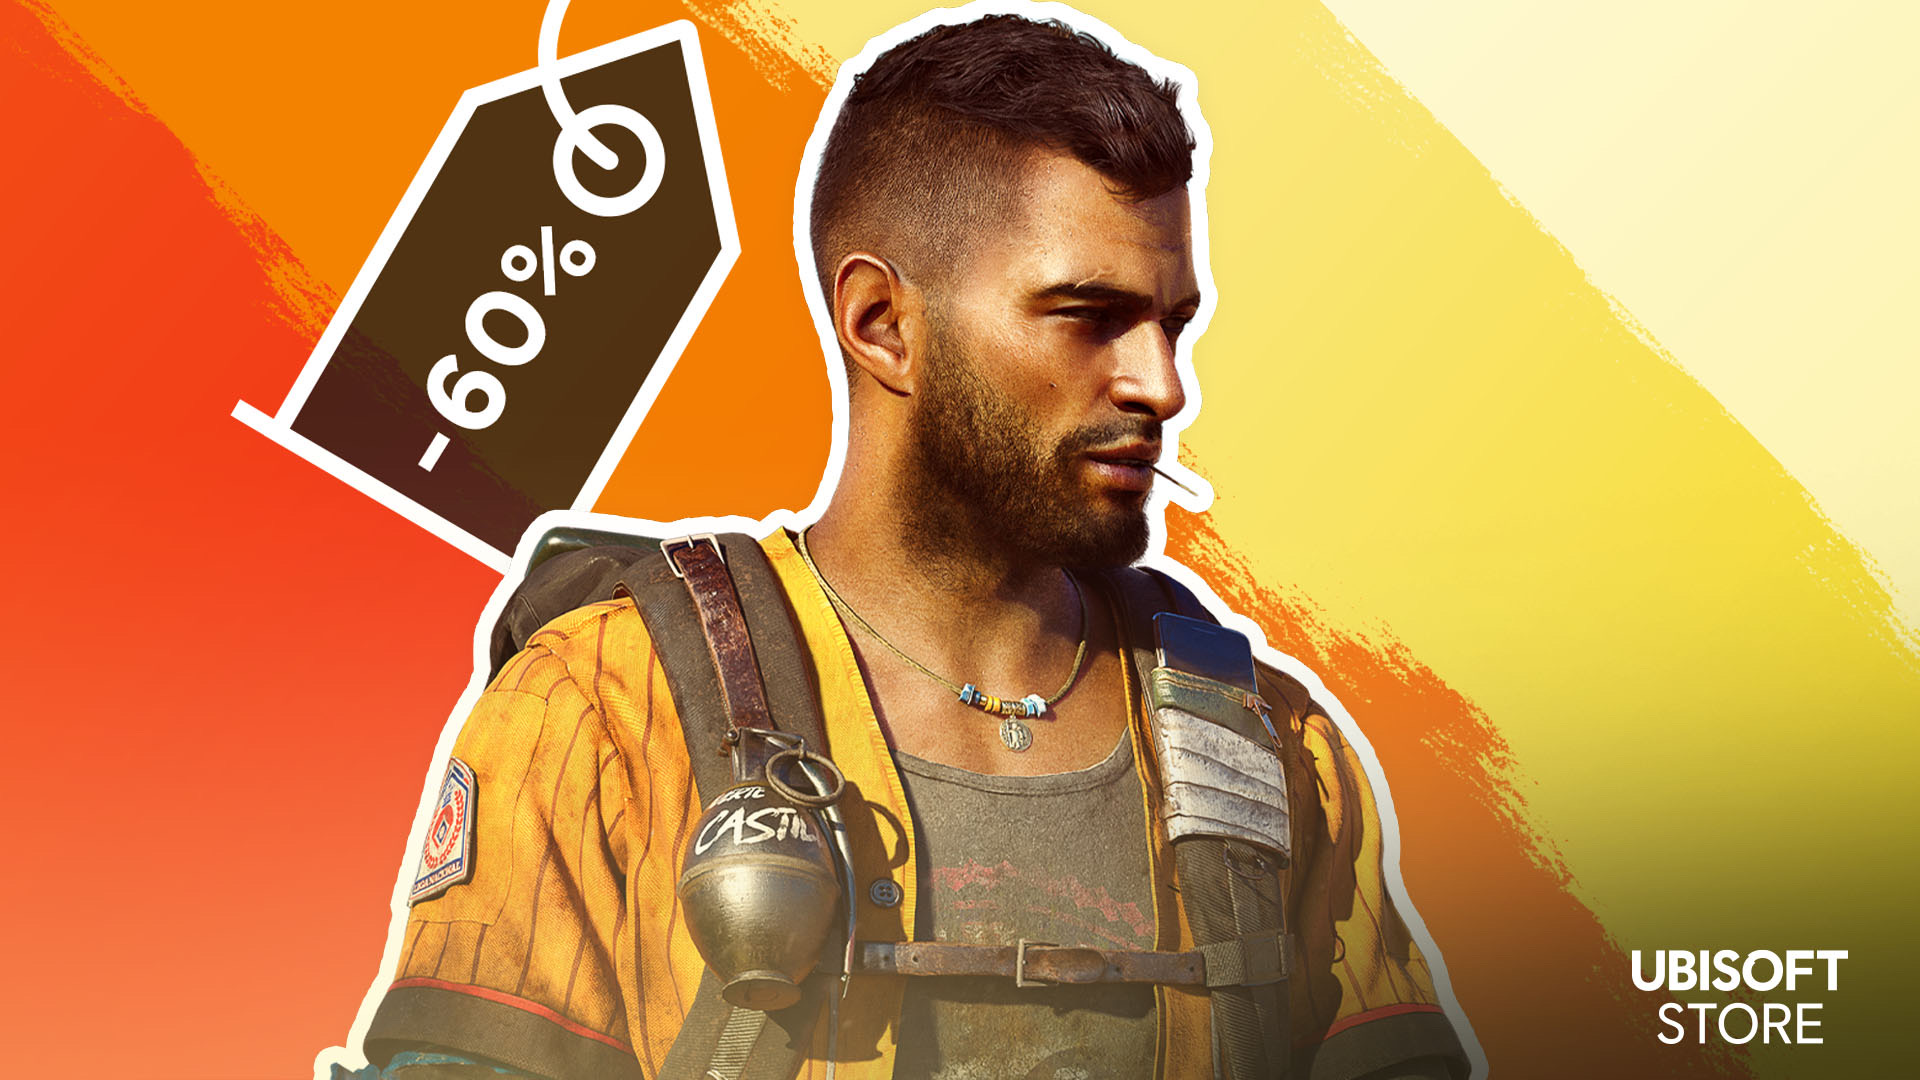 Far Cry 6 sees 25% more engagement than Far Cry 5